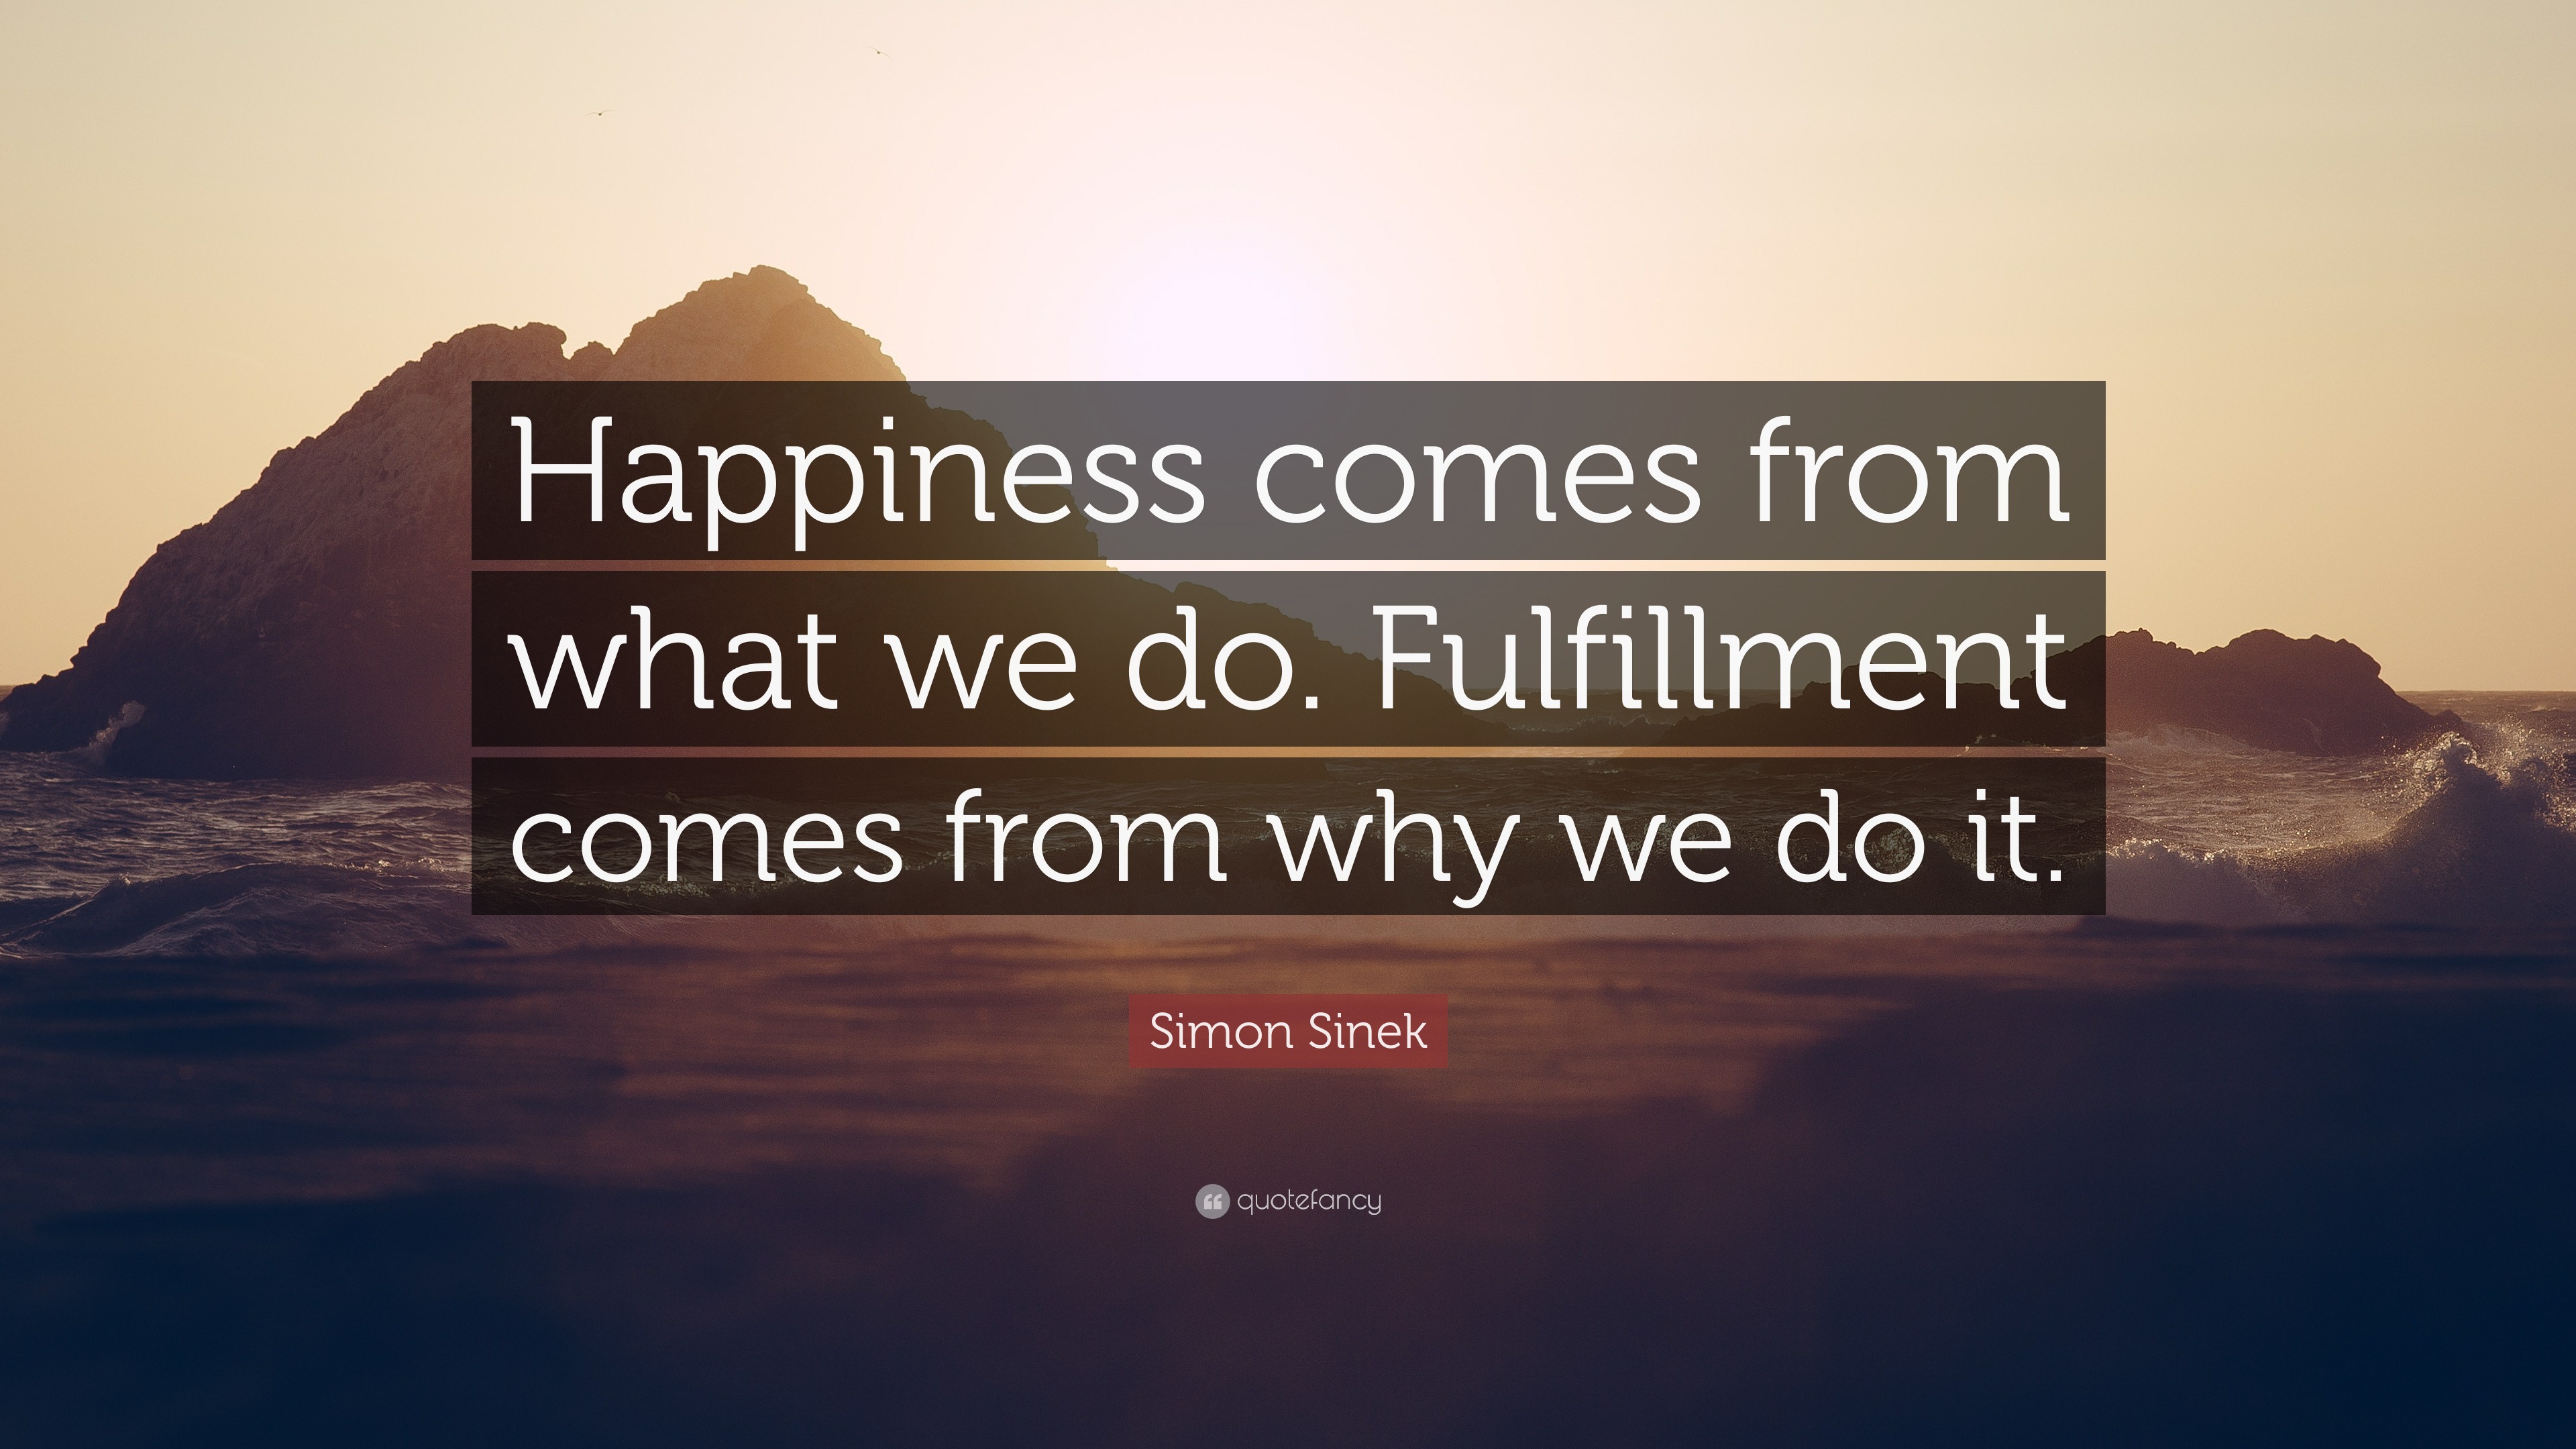 Simon Sinek Quote: “Happiness comes from what we do. Fulfillment comes from  why we do it.”